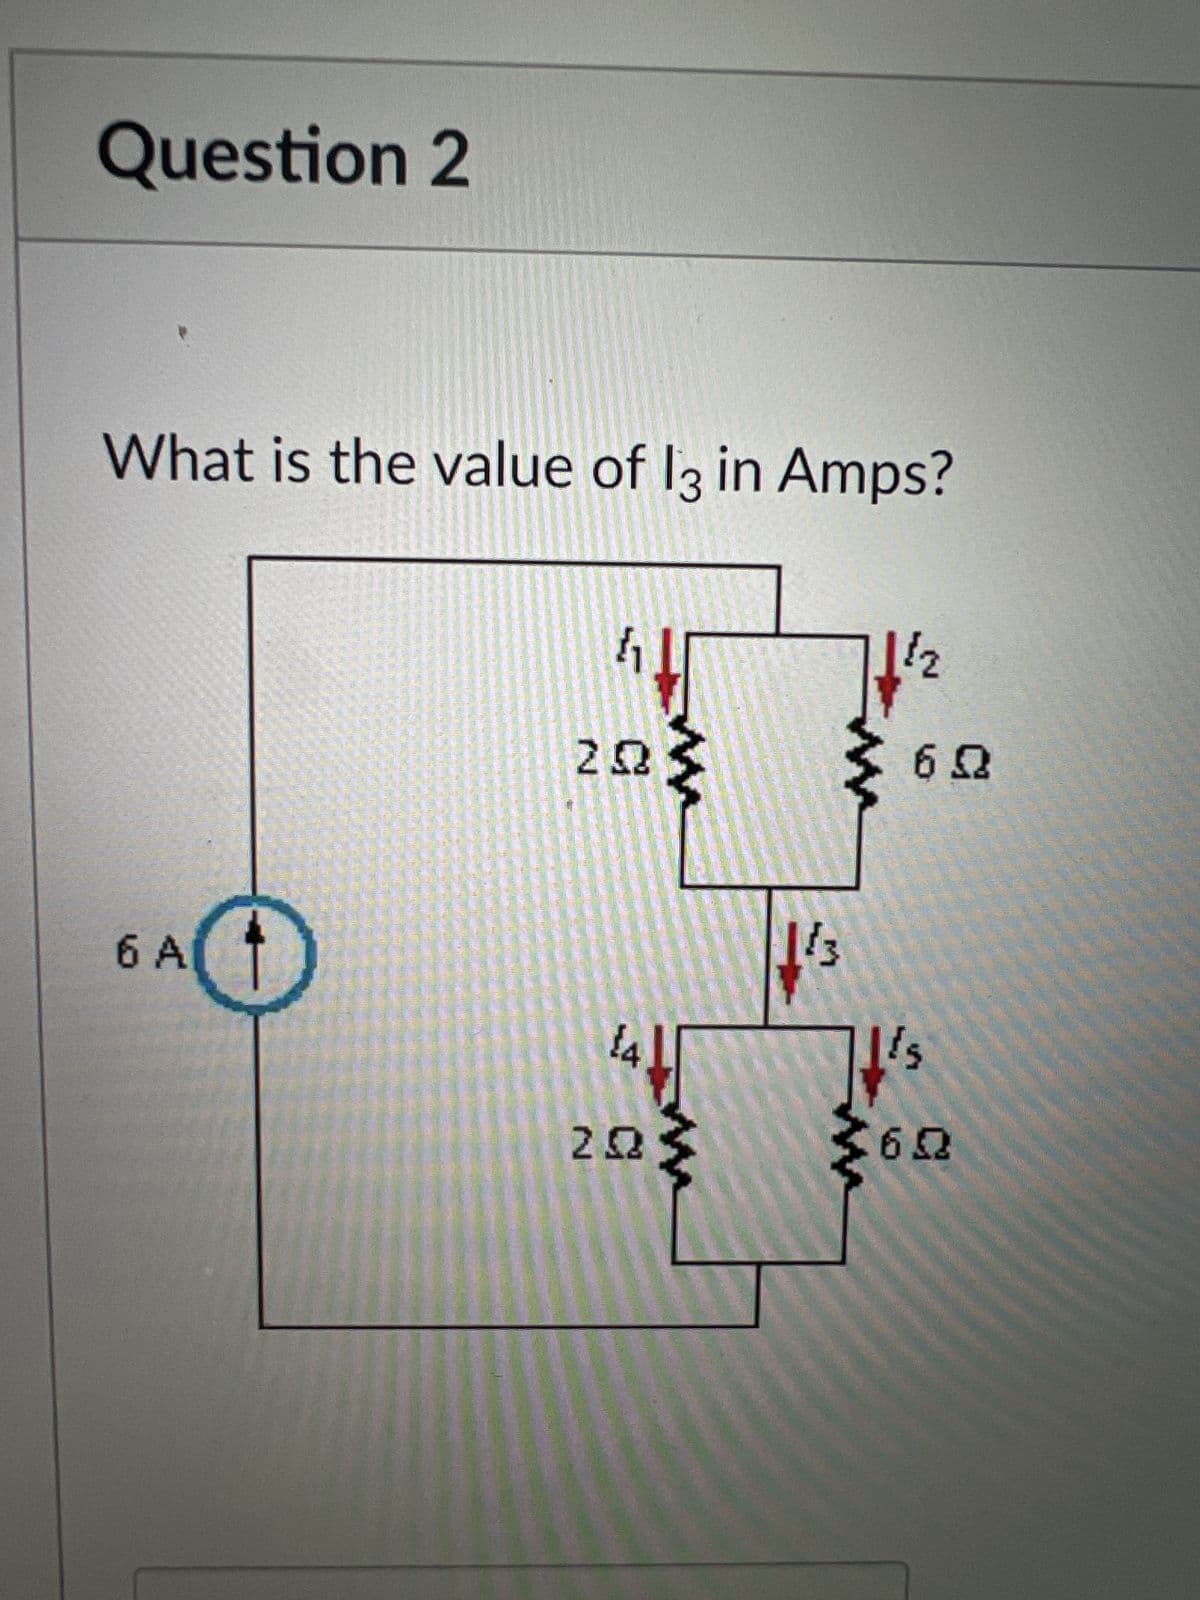 Question 2
What is the value of 13 in Amps?
O
6 A
11
ΖΩ
14
203 {
7/²2
$13
60
It's
60